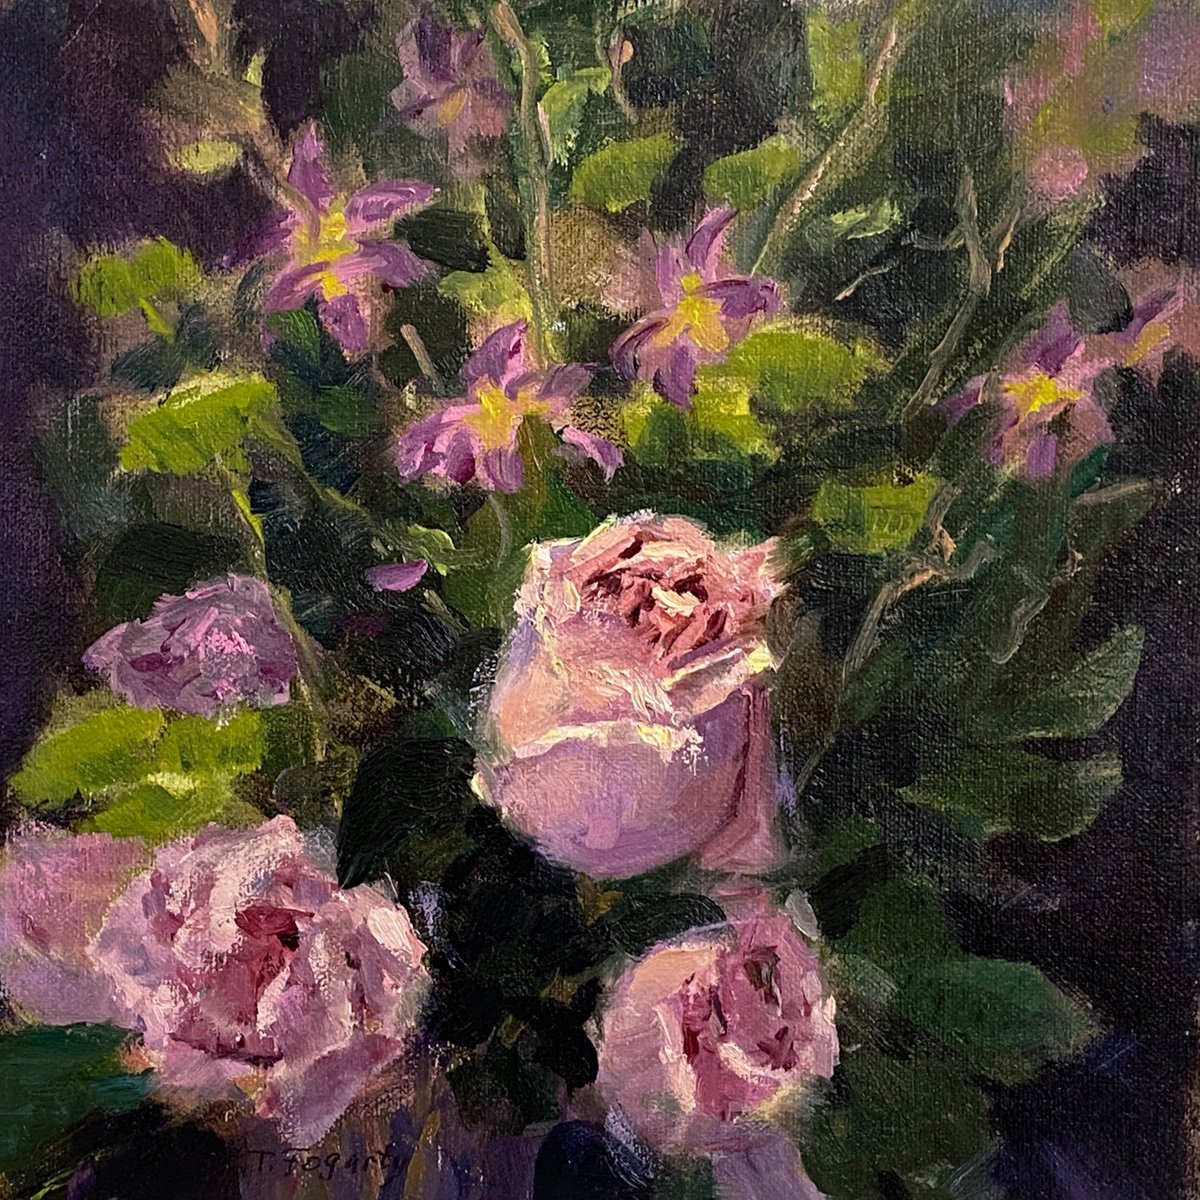 Roses For My Valentine by Tatyana Fogarty